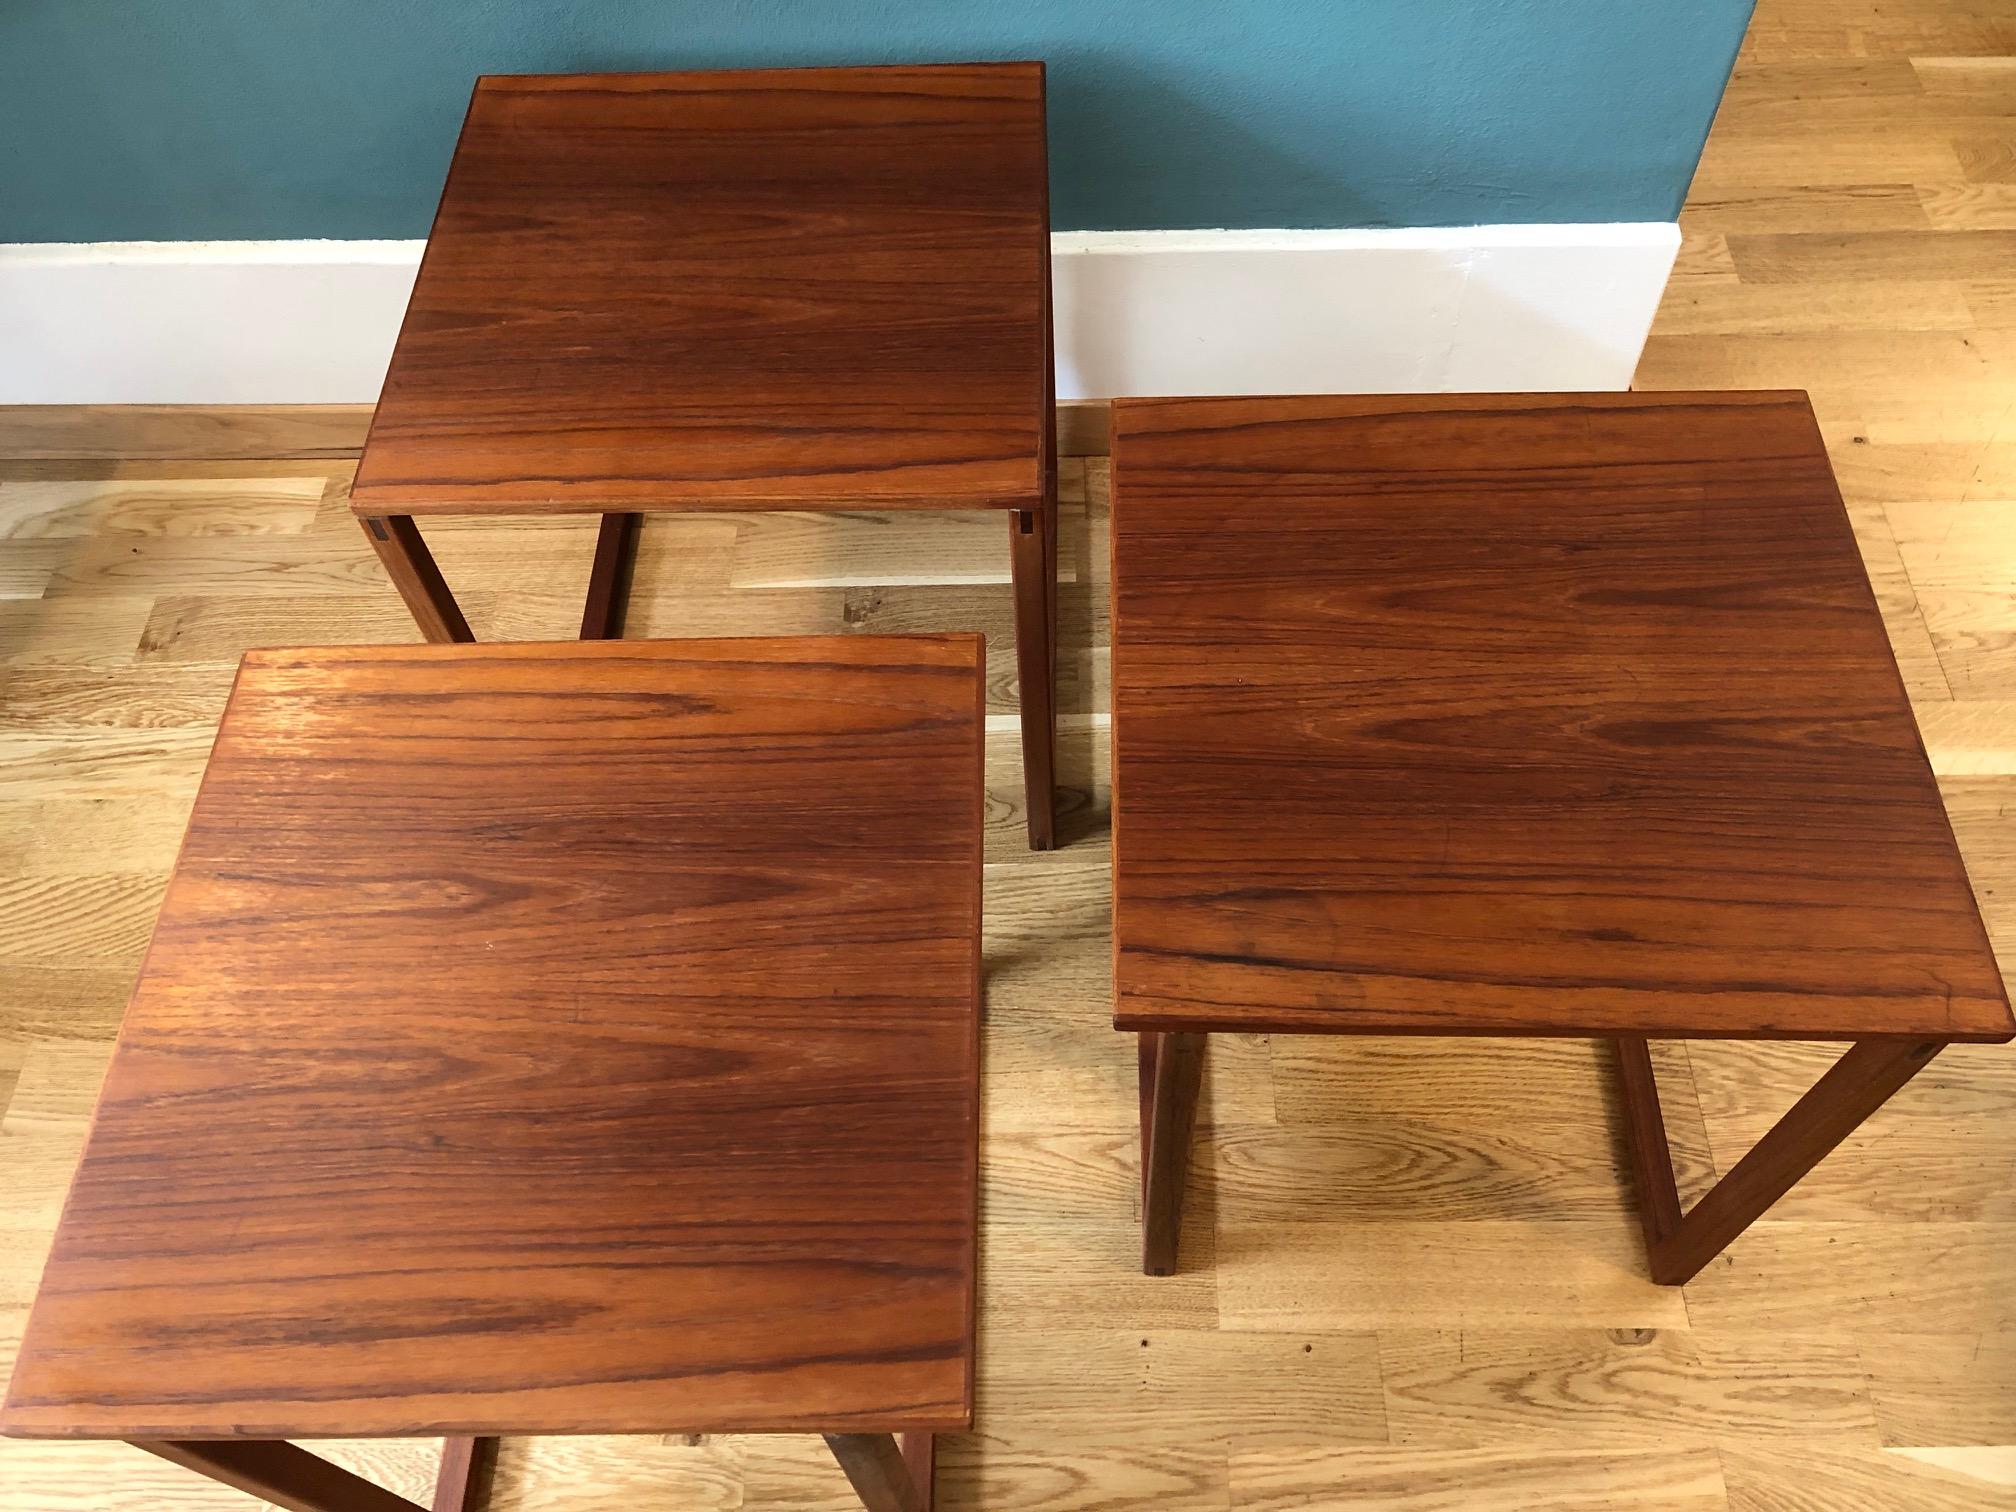 Set of 3 interlocking teak nesting side tables which can be placed individually into each other or loose. You can also form an open side and bottom cube. Two tables slide into the sides of the center table. Constructed of figured teak wood veneered